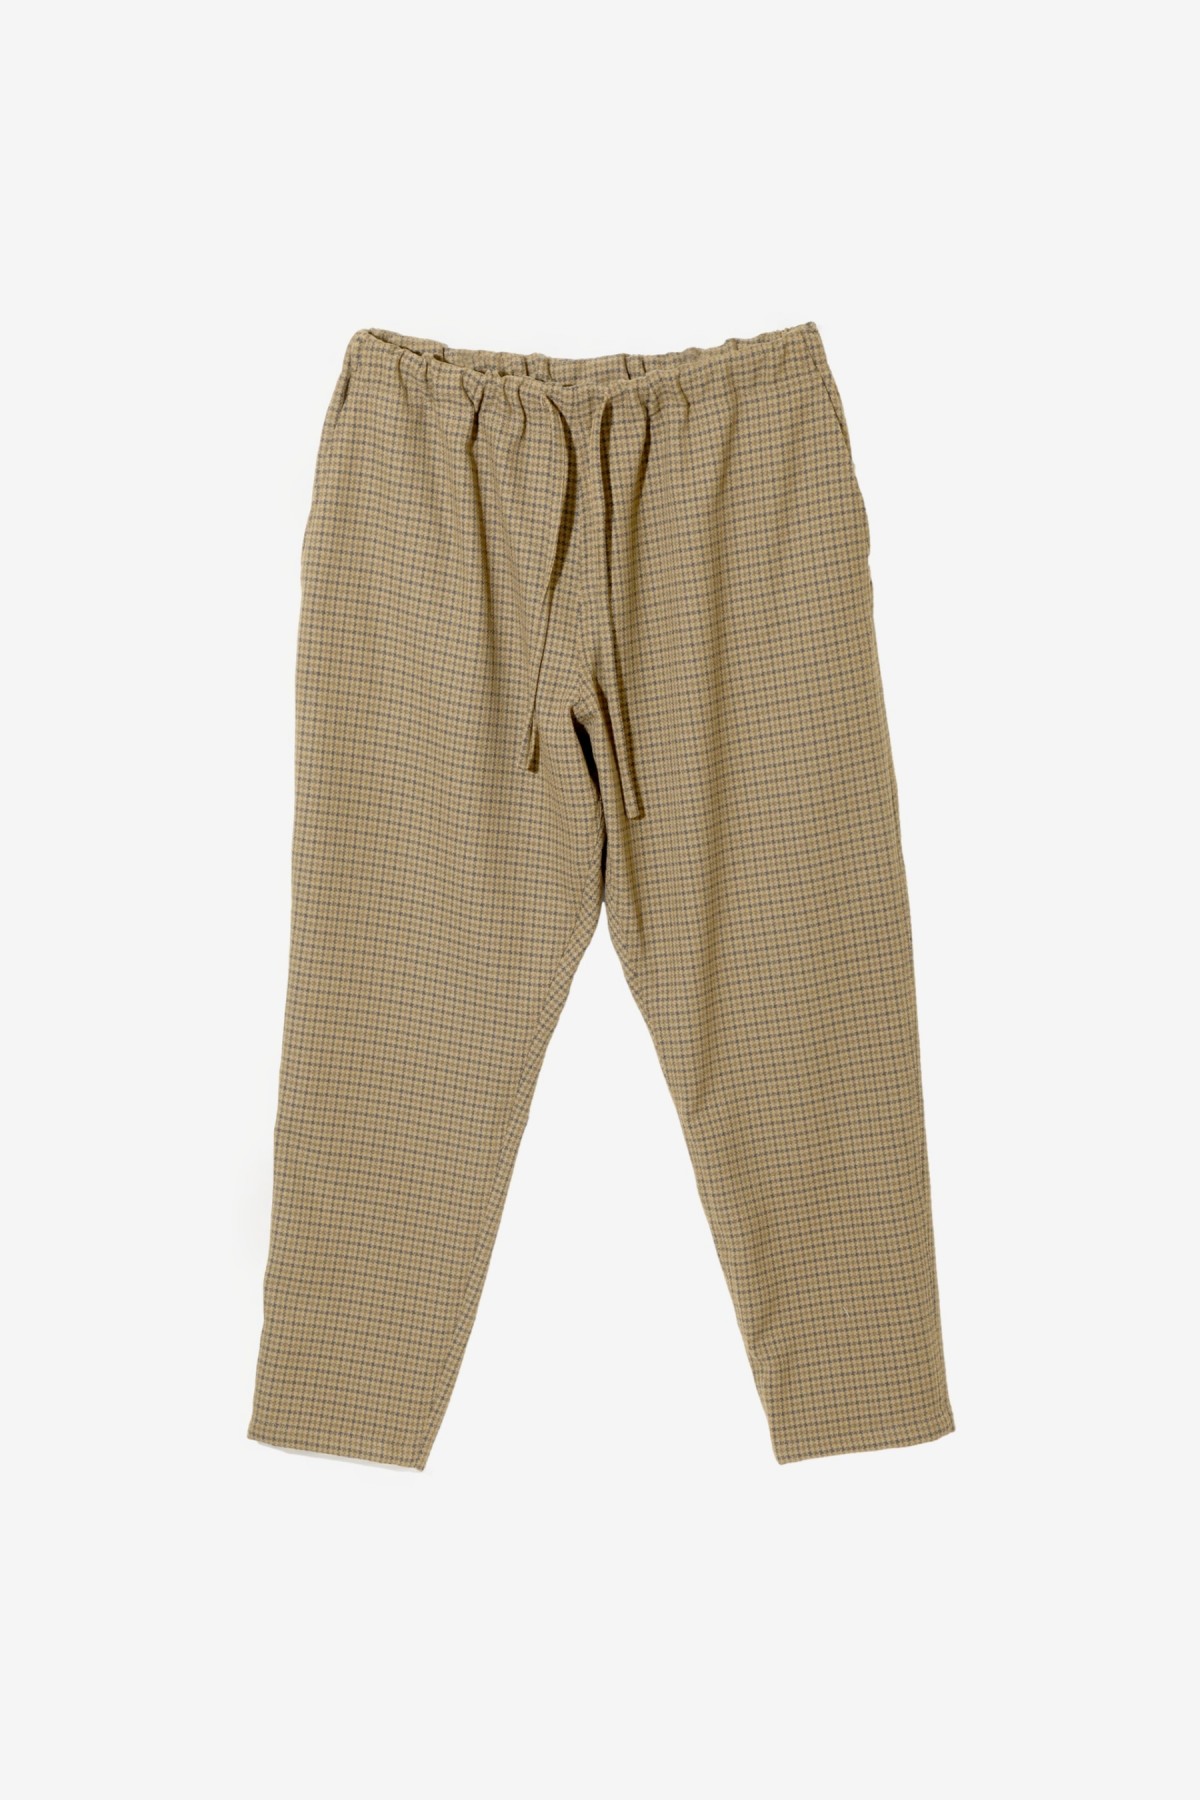 South2 West8 String Slack Pant in Houndstooth Beige/Charcoal